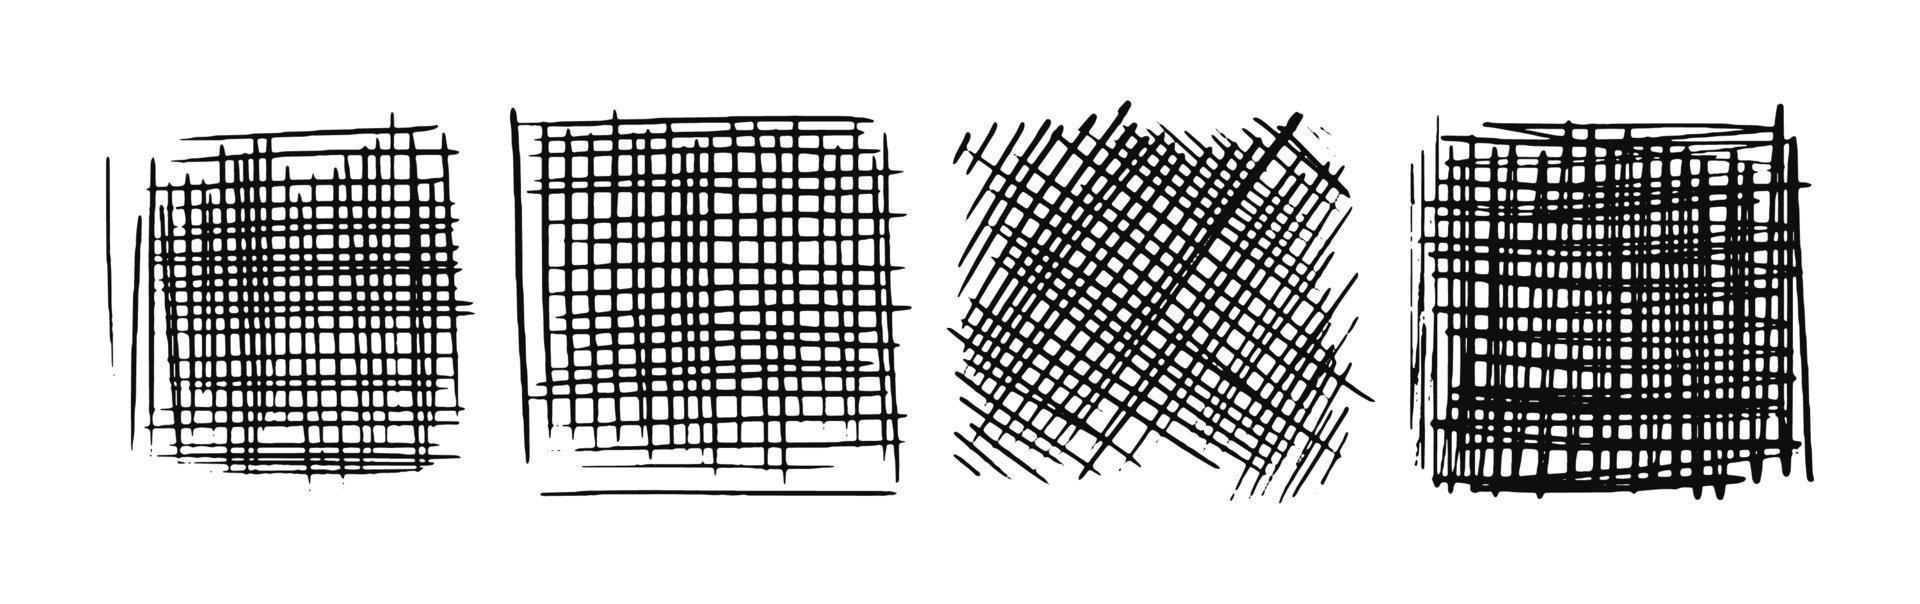 Drawn hatching squares. A set of hand drawn hatched strikethrough doodles. Diagonal, vertical, or parallel square strokes. Vector stock illustration isolated on white.